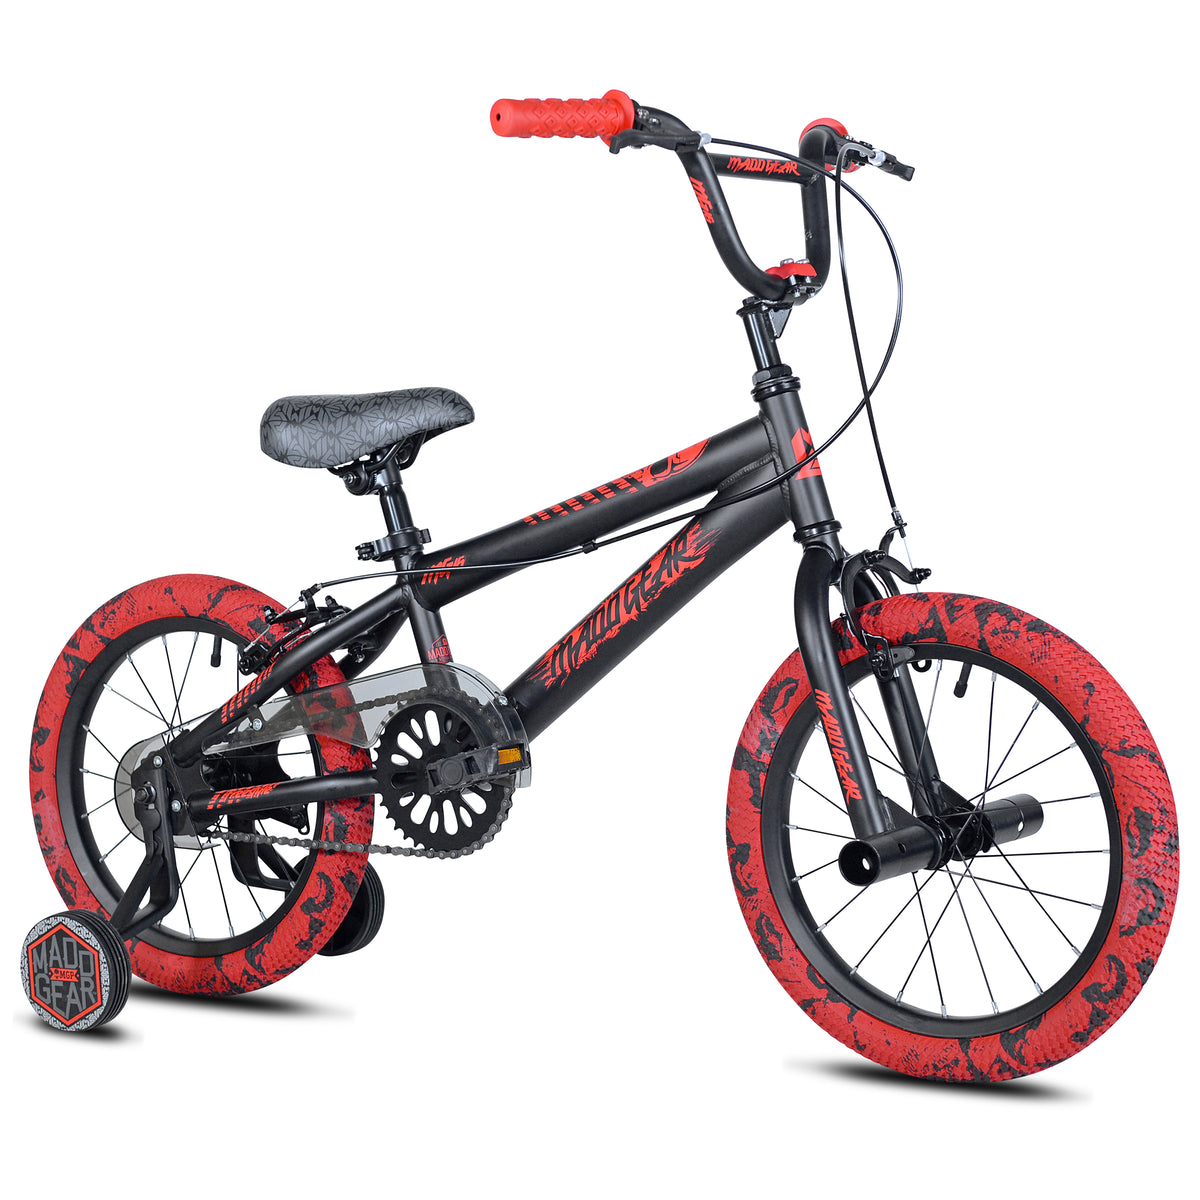 16" Madd Gear® MG16 | Bike for Kids Ages 4-6